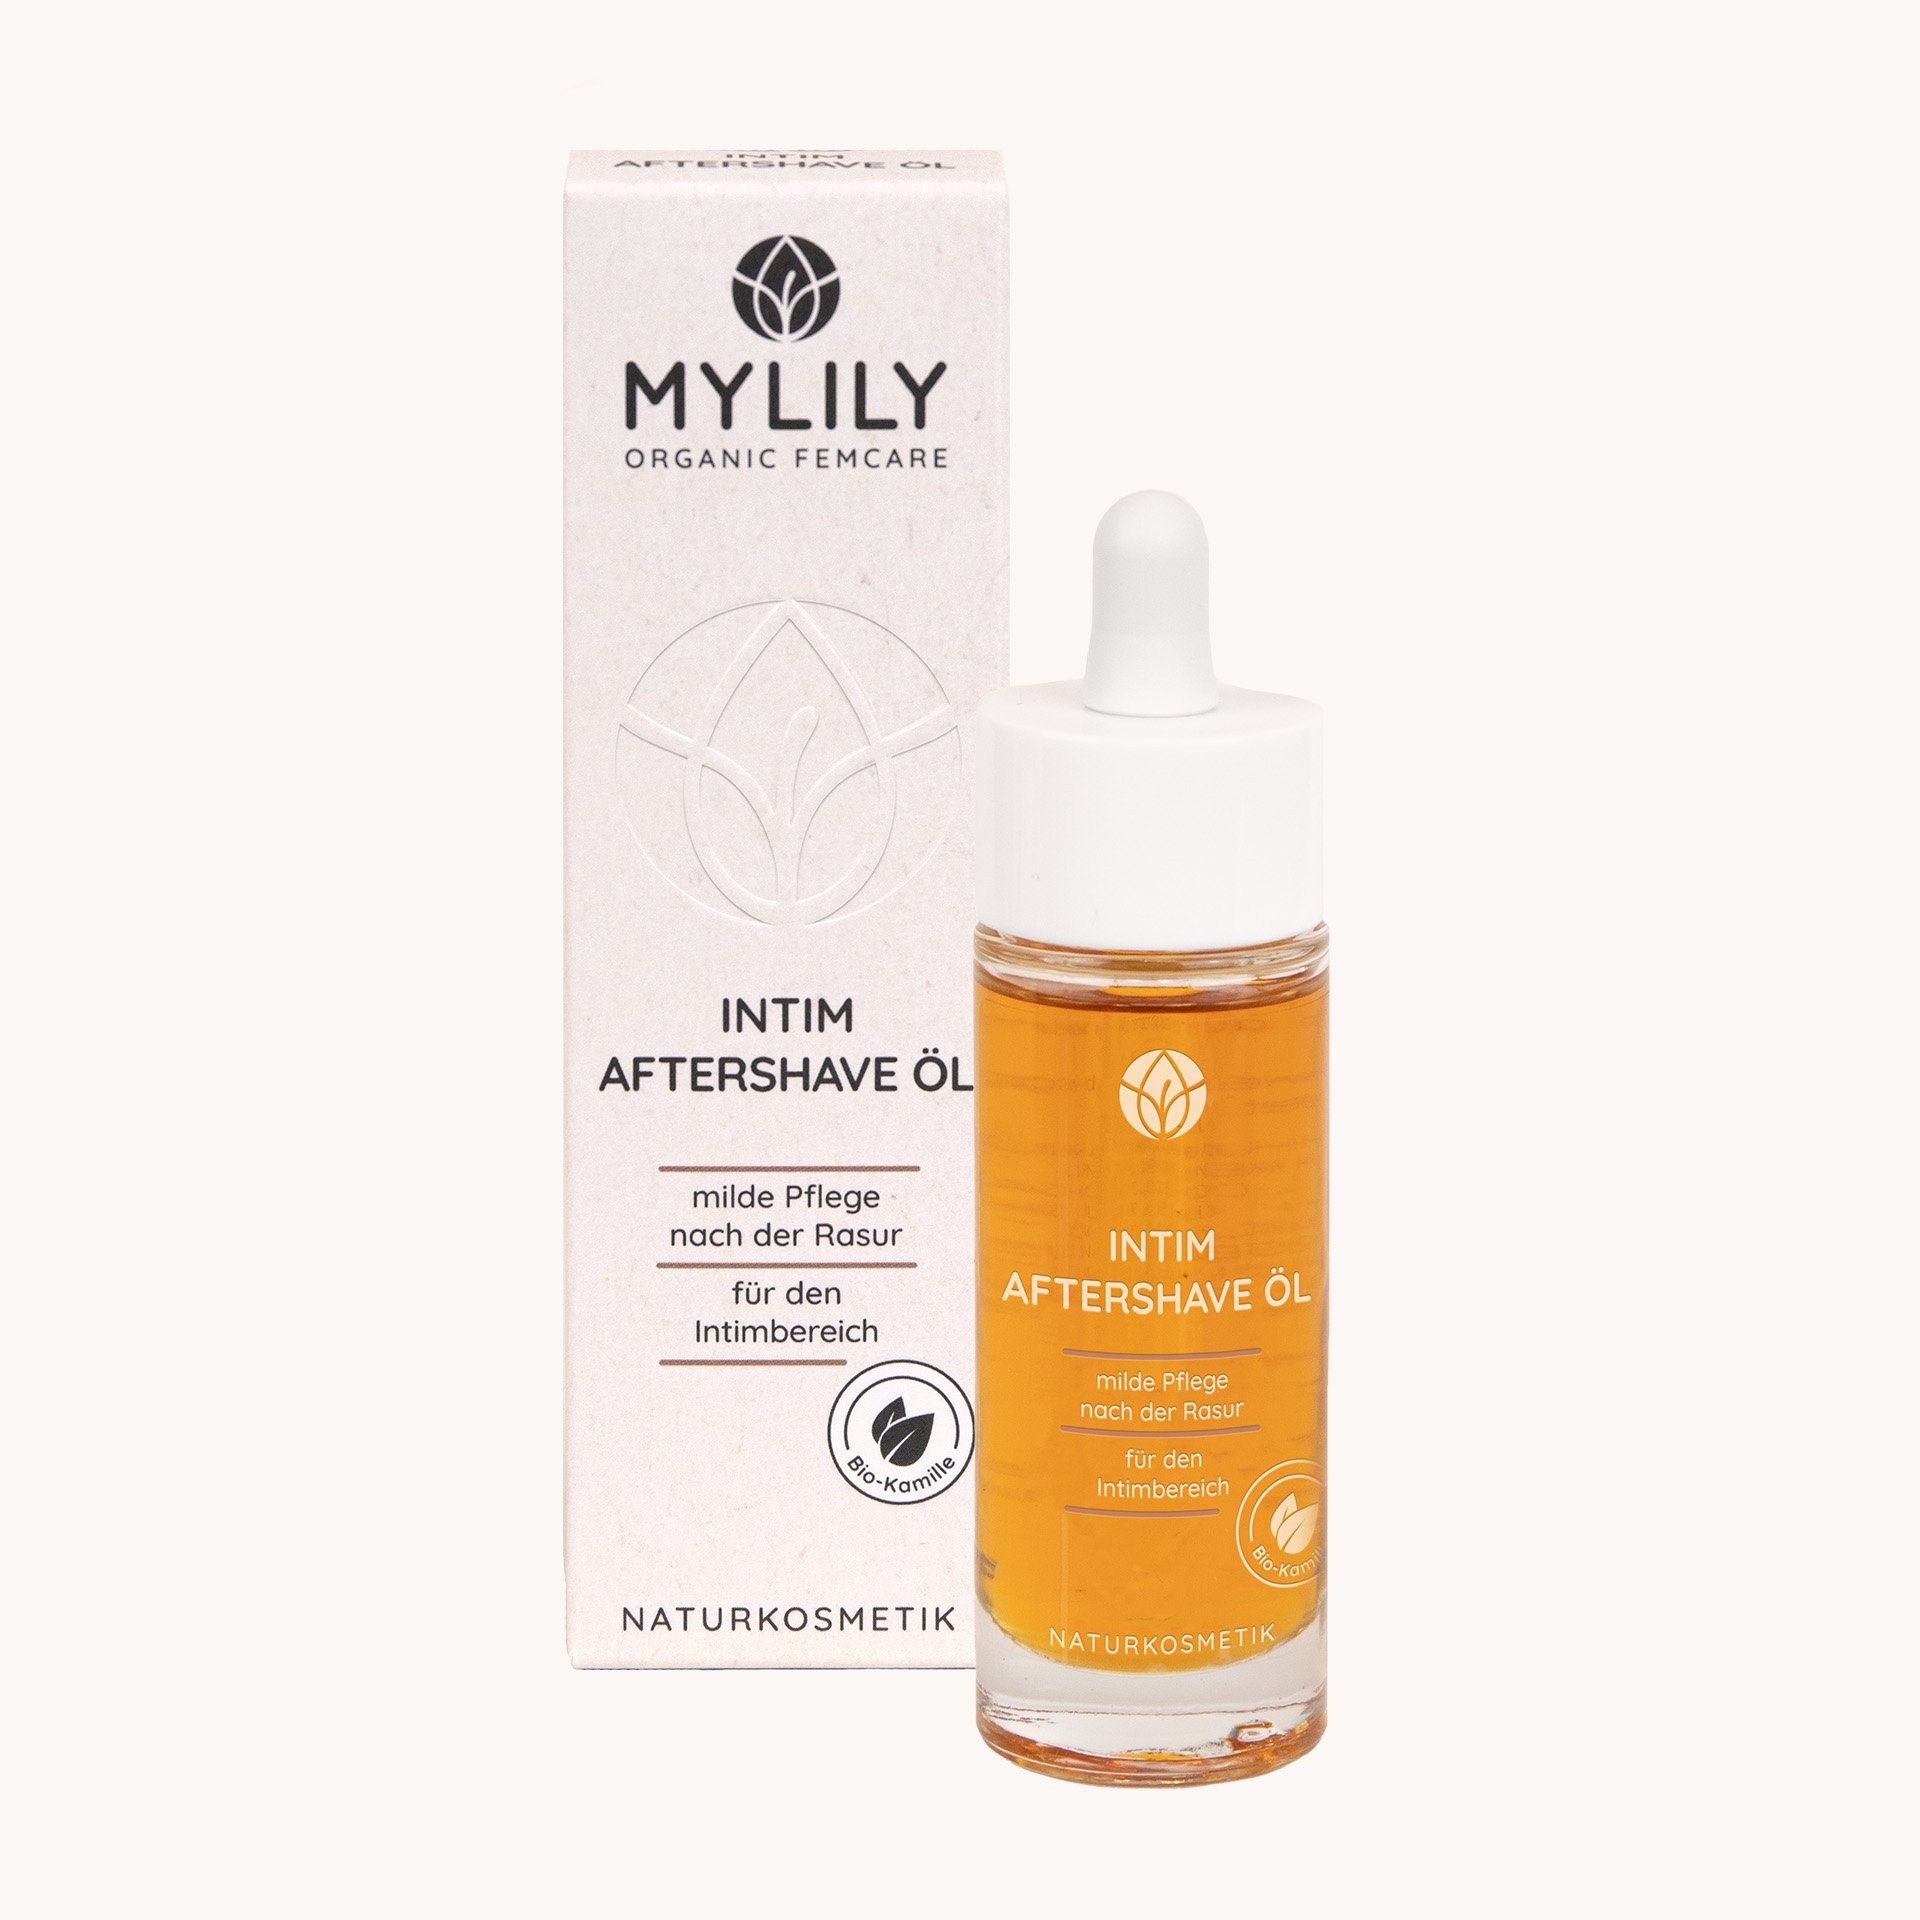 MYLILY After Shave Lotion Intim Aftershave Bio-Kamille, Öl 1-tlg. mit